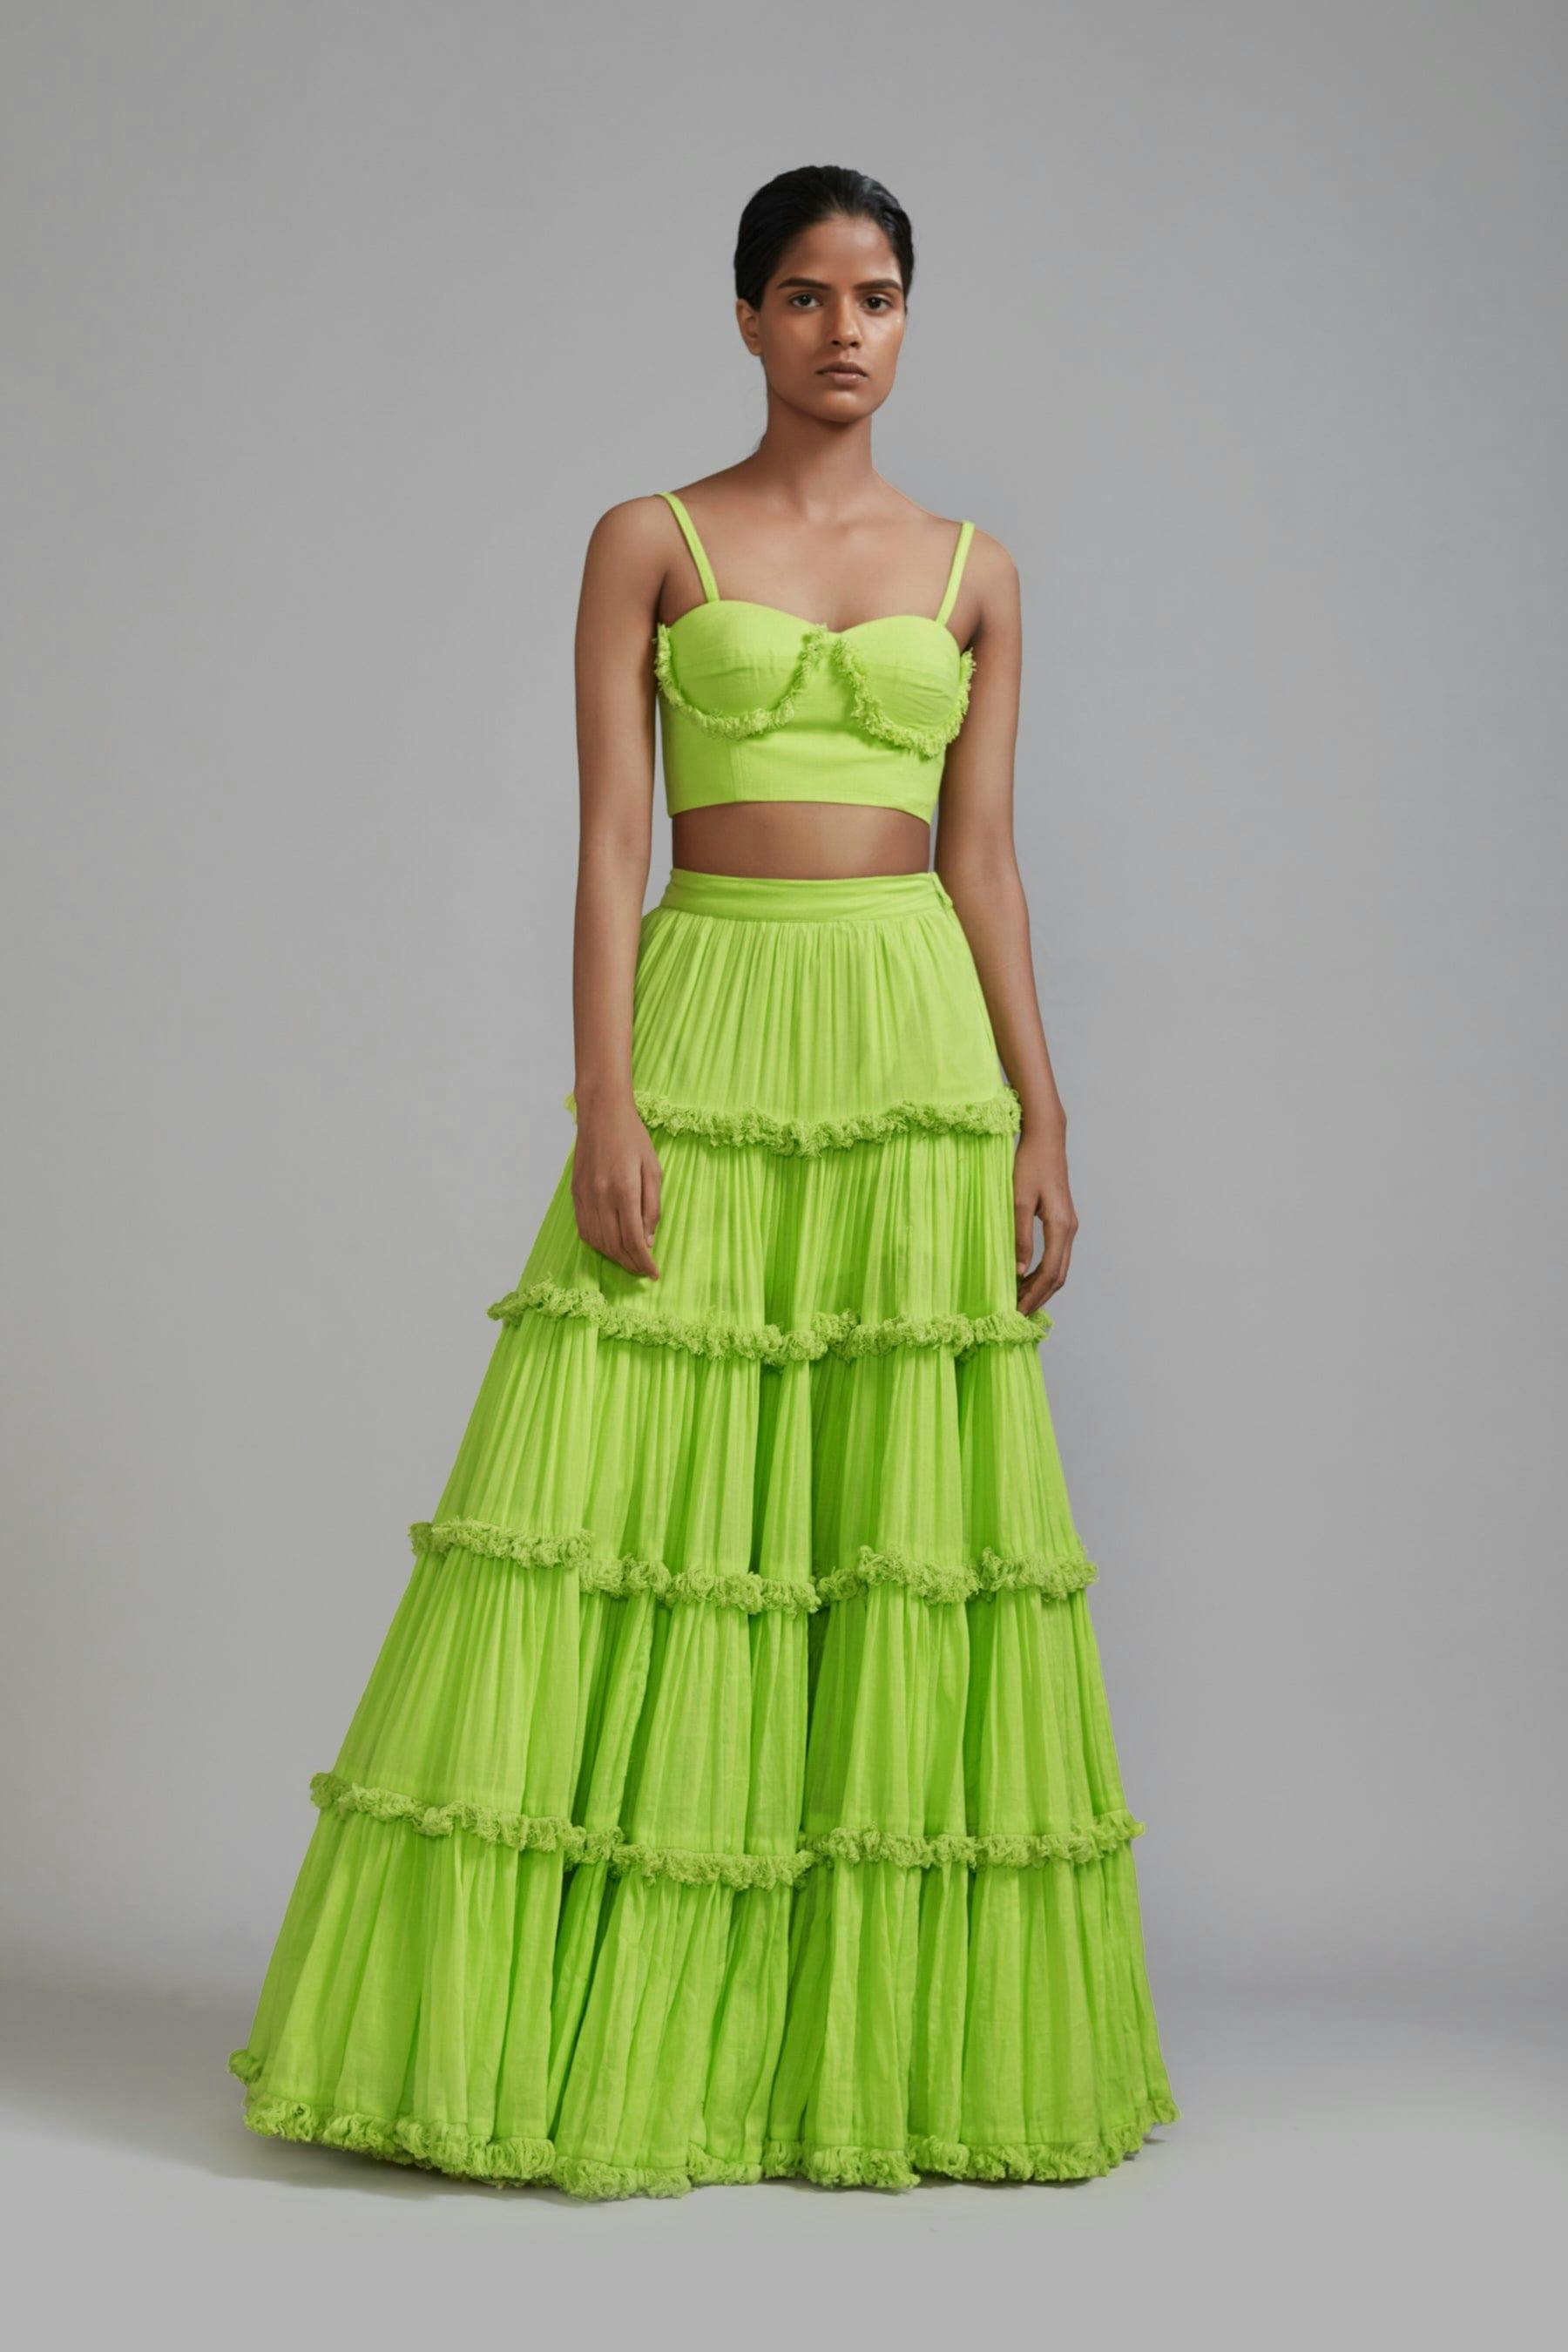 Neon Green Fringed Tiered Lehenga Set (2 PCS), a product by Style Mati